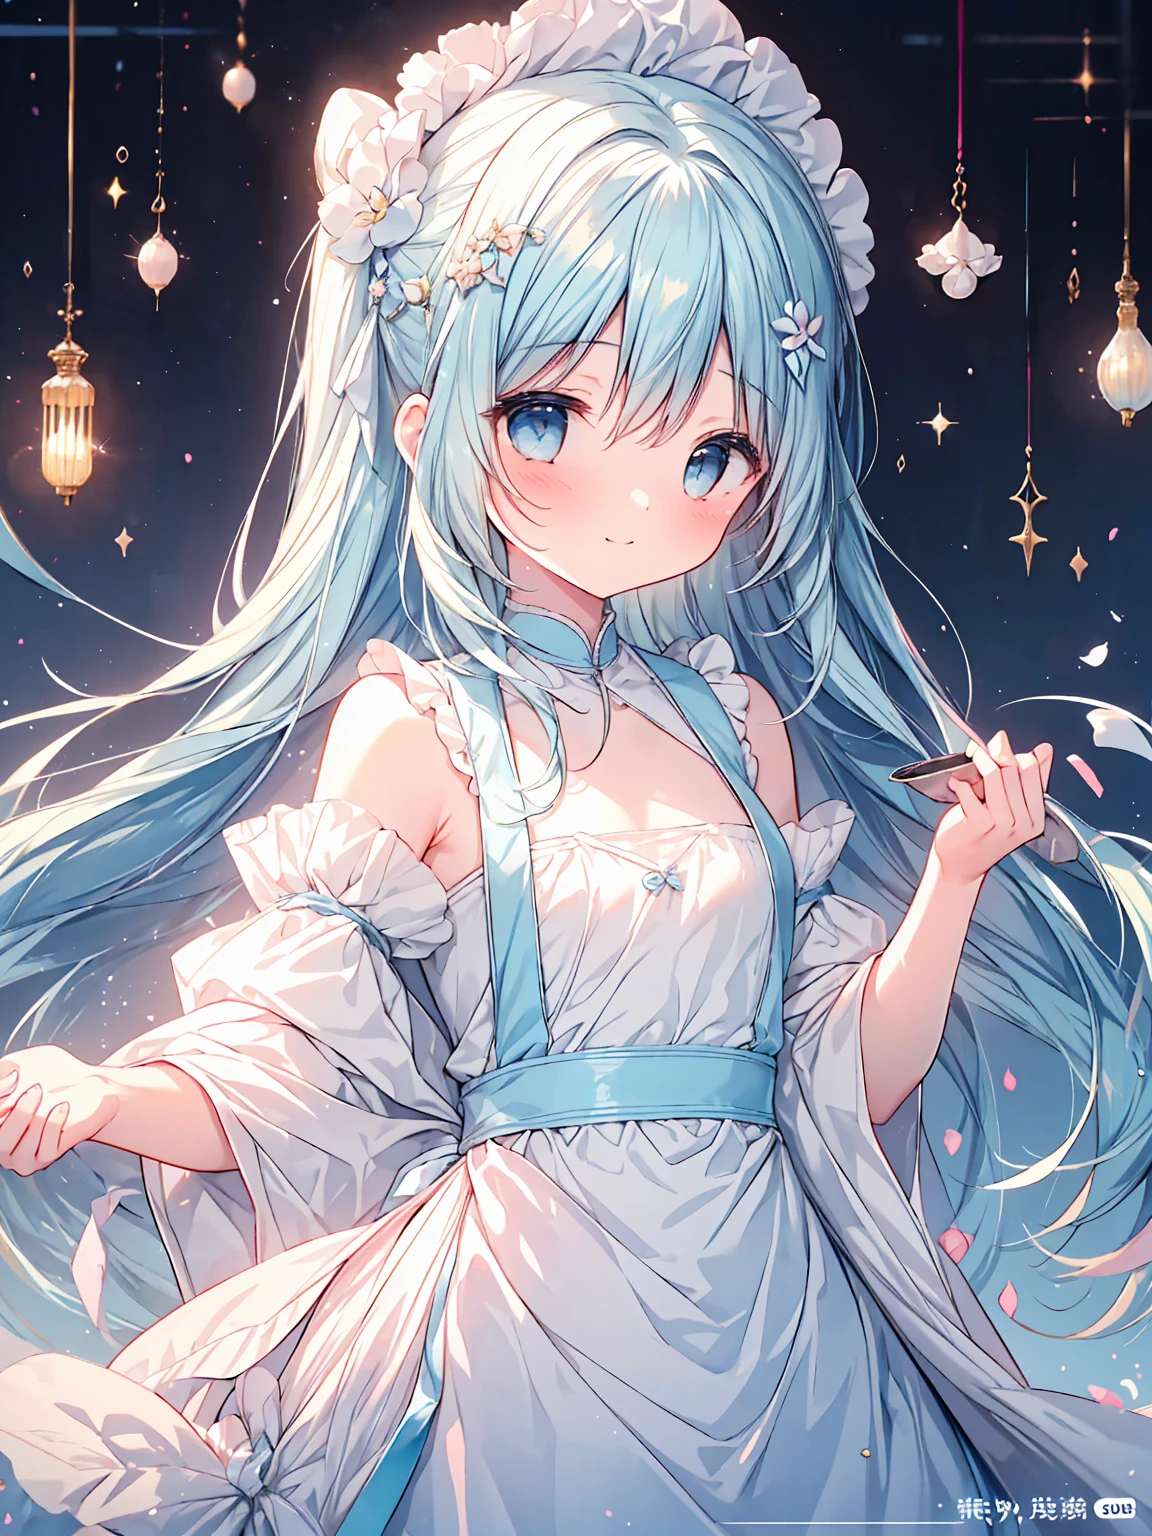 masterpiece, best quality, extremely detailed, (illustration, official art:1.1), 1 girl ,(((( light blue long hair)))), light blue hair, ,10 years old, long hair ((blush)) , cute face, big eyes, masterpiece, best quality,(((((a very delicate and beautiful girl))))),Amazing,beautiful detailed eyes,blunt bangs((((little delicate girl)))),tareme(true beautiful:1.2), sense of depth,dynamic angle,affectionate smile, (true beautiful:1.2),,(tiny 1girl model:1.2),(flat chest)), Soft Focus ,((ultra-detailliert:1.2))、Girl with dream of becoming a pastry chef。She wears a pink apron and a white shirt.、Her hair is in a brown ponytail。Although she is making cakes and cookies in the kitchen、Very skillful and amazingly skillful。She kneaded the dough or、Put it in a mold、It depicts how to decorate、Her face is a mixture of seriousness and fun。In the background, there are showcases and registers with her workake you feel the atmosphere of the store。She's working hard to achieve her dream.、Makes you want to support those who are watching